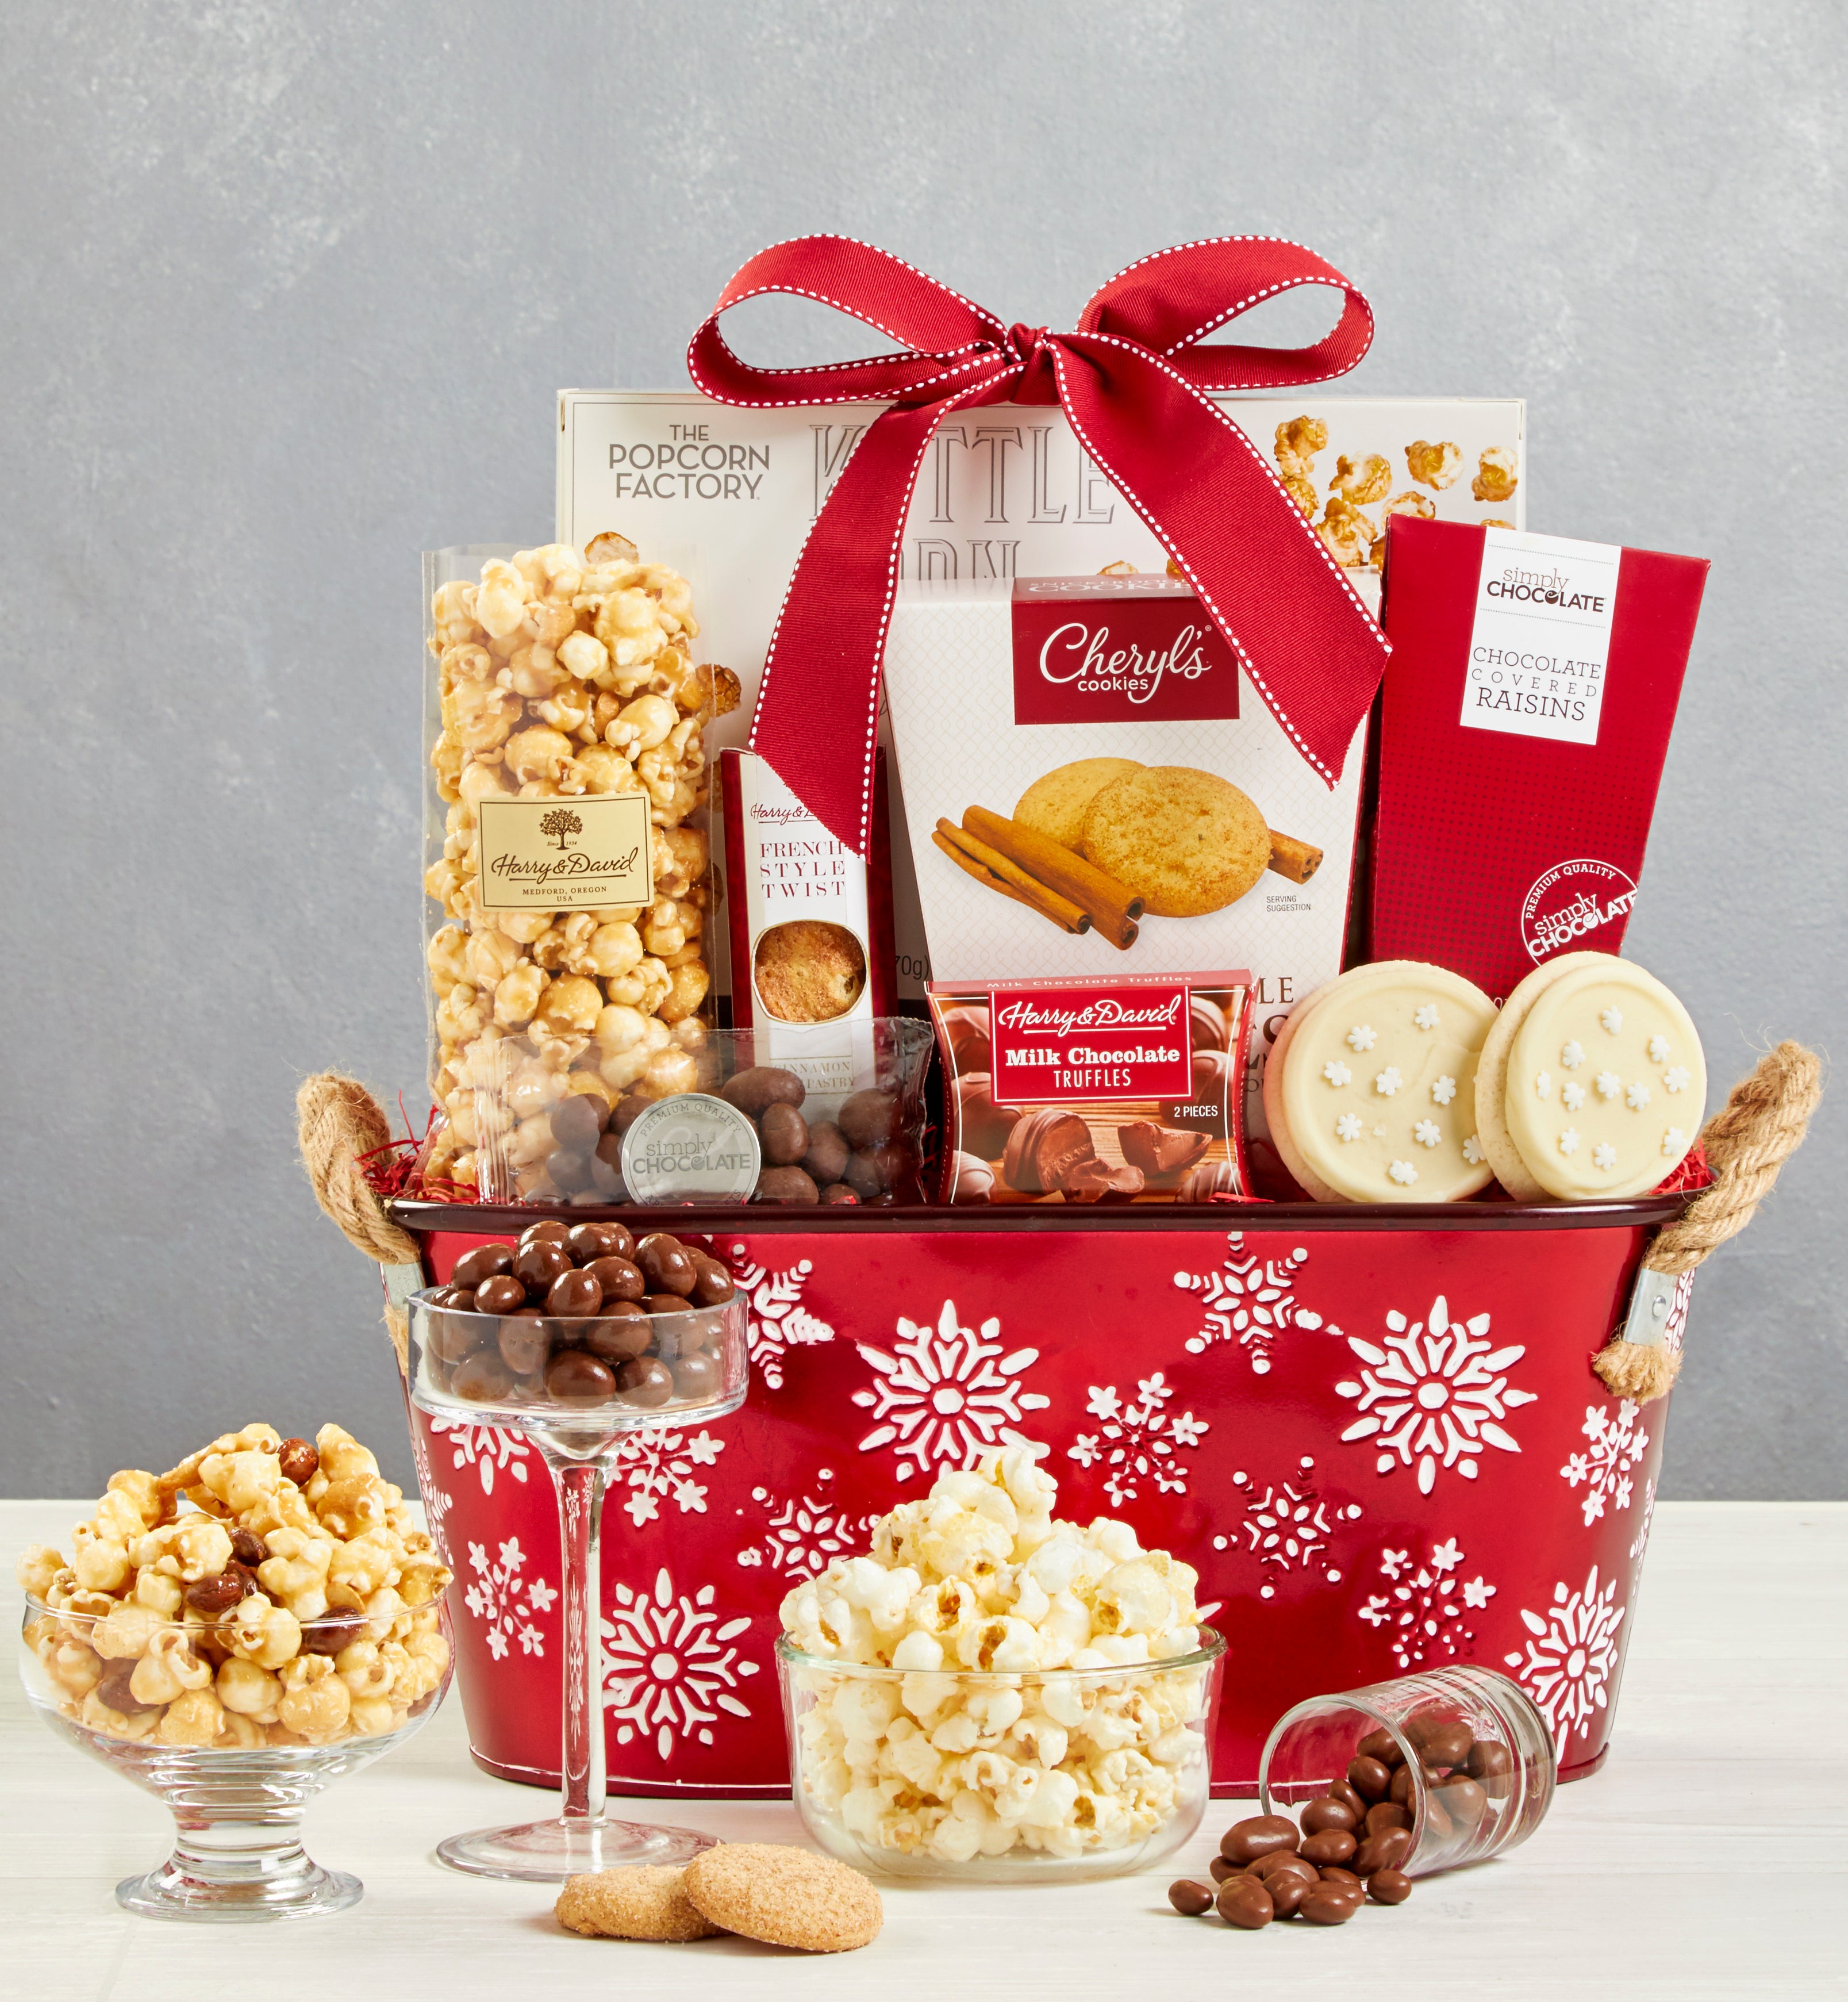 best holiday gift baskets to send